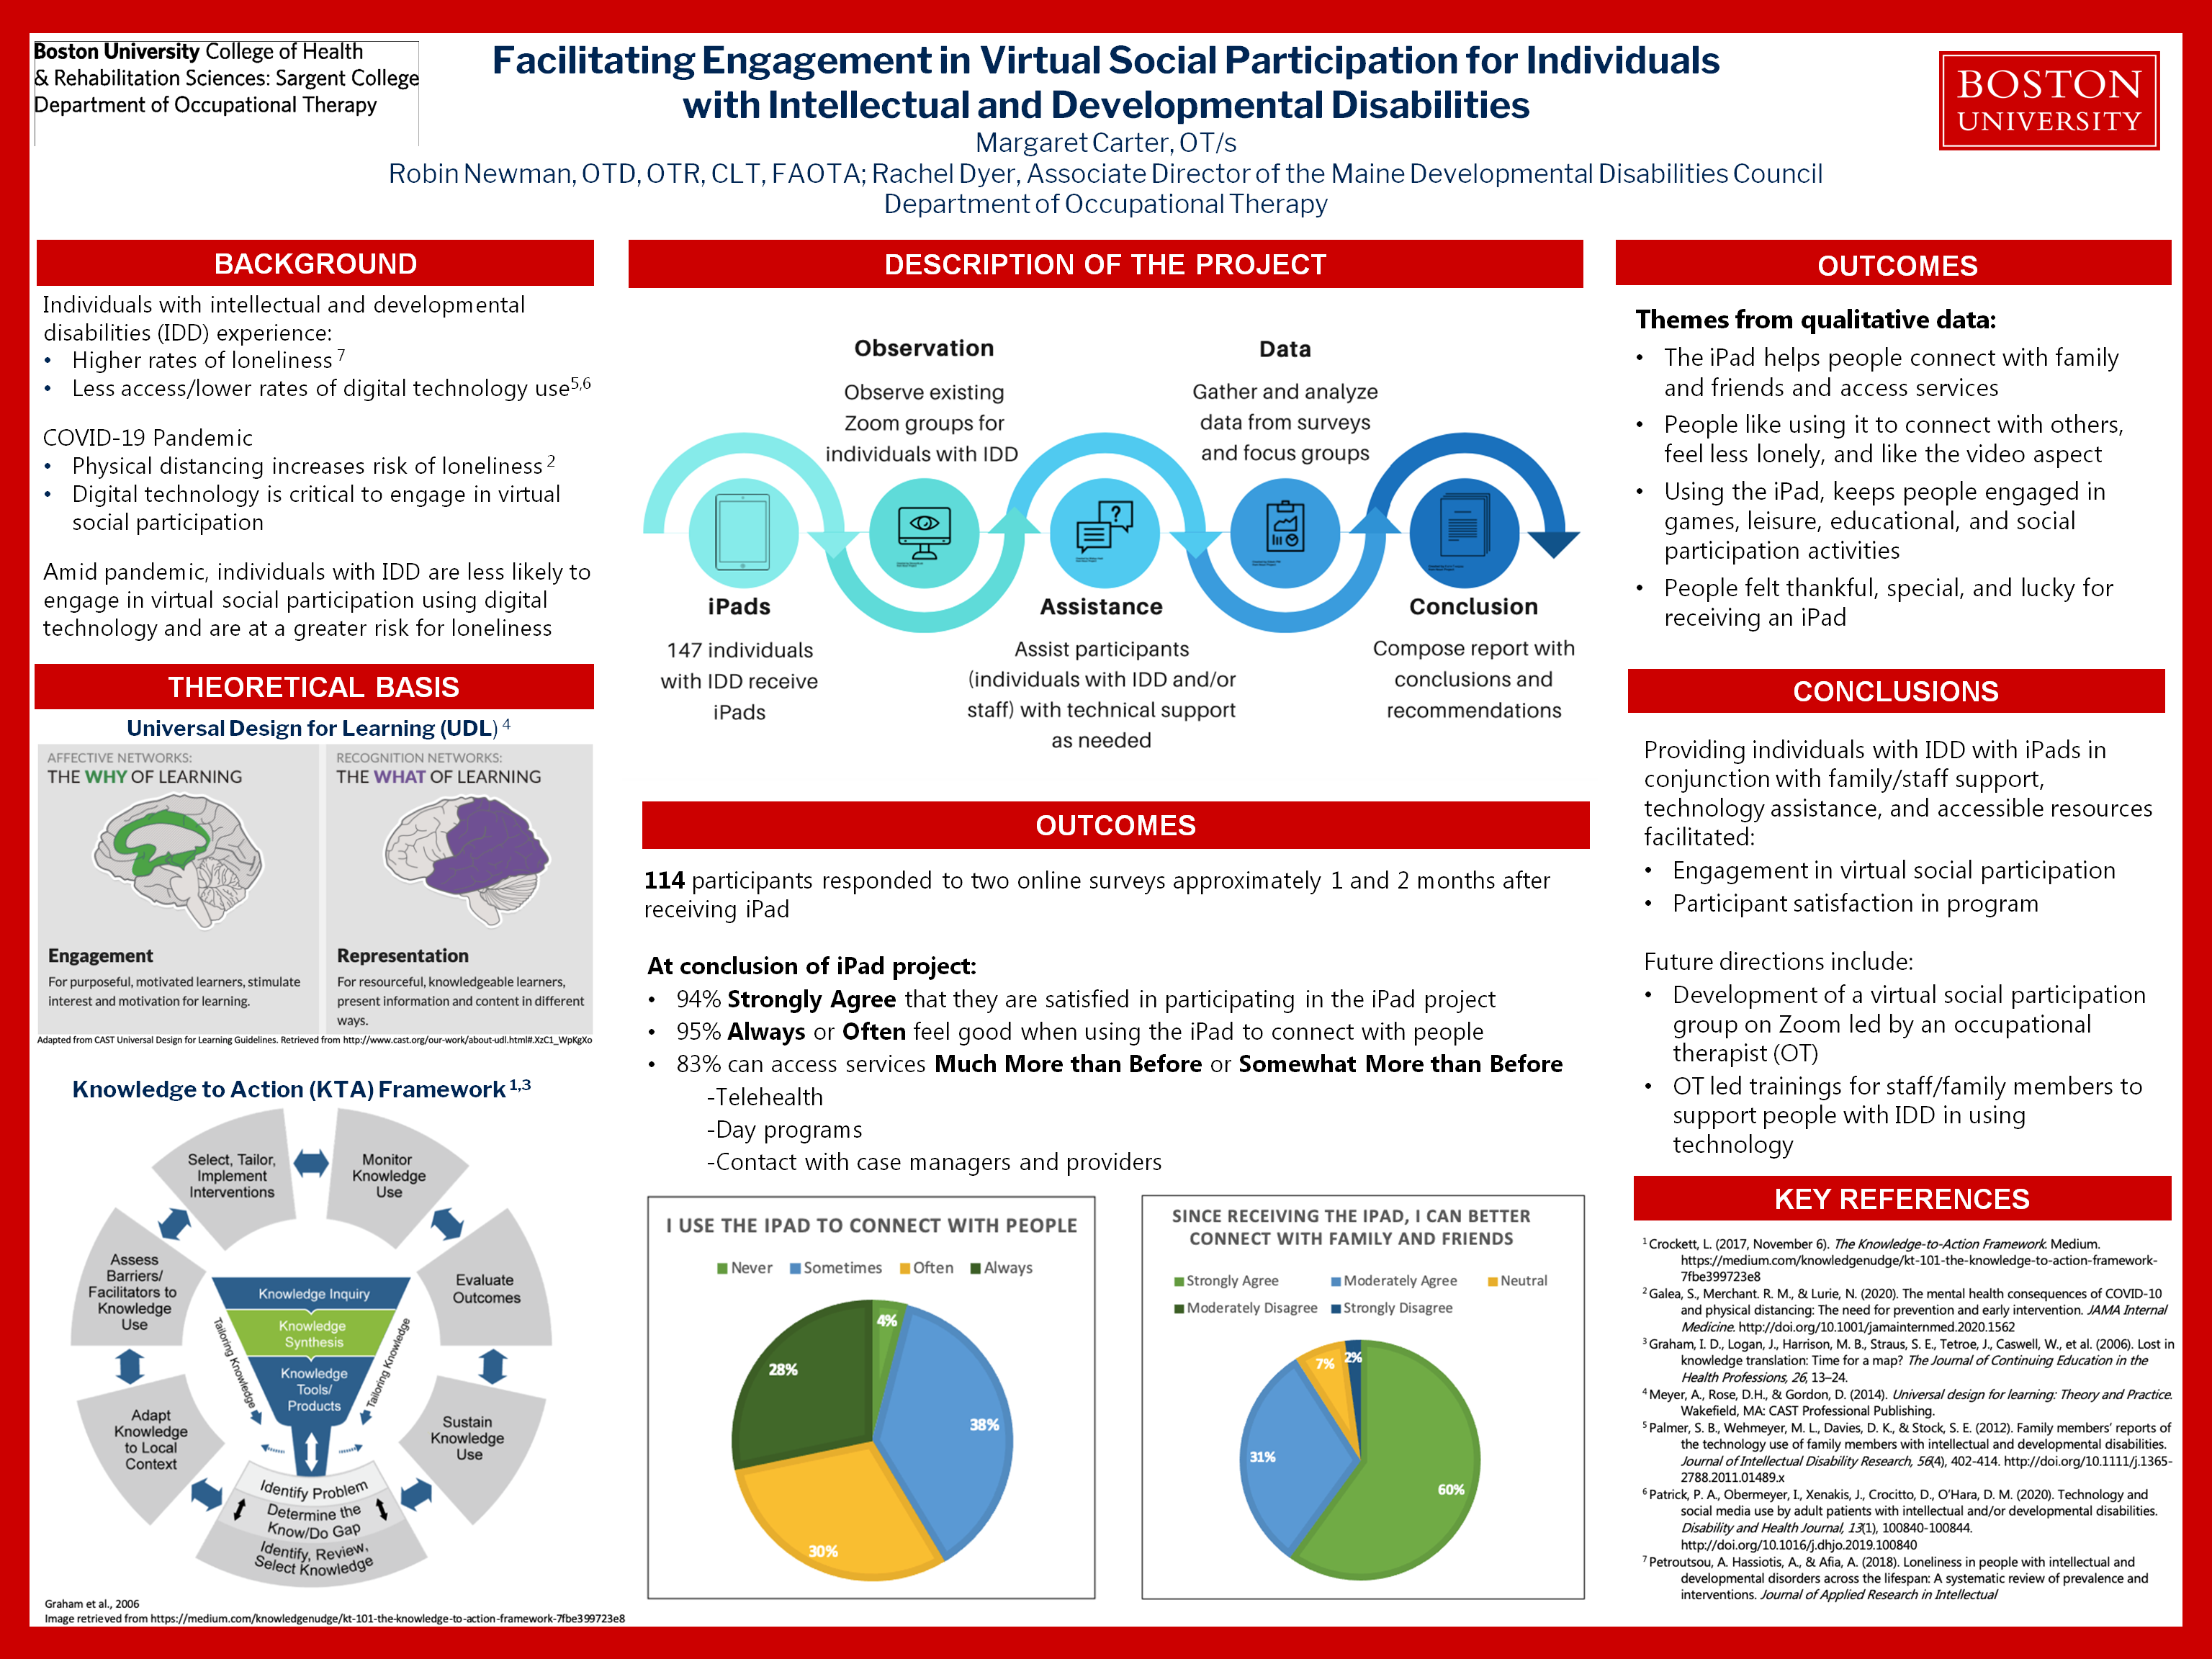 Poster of DD Access to Tech Findings - text below